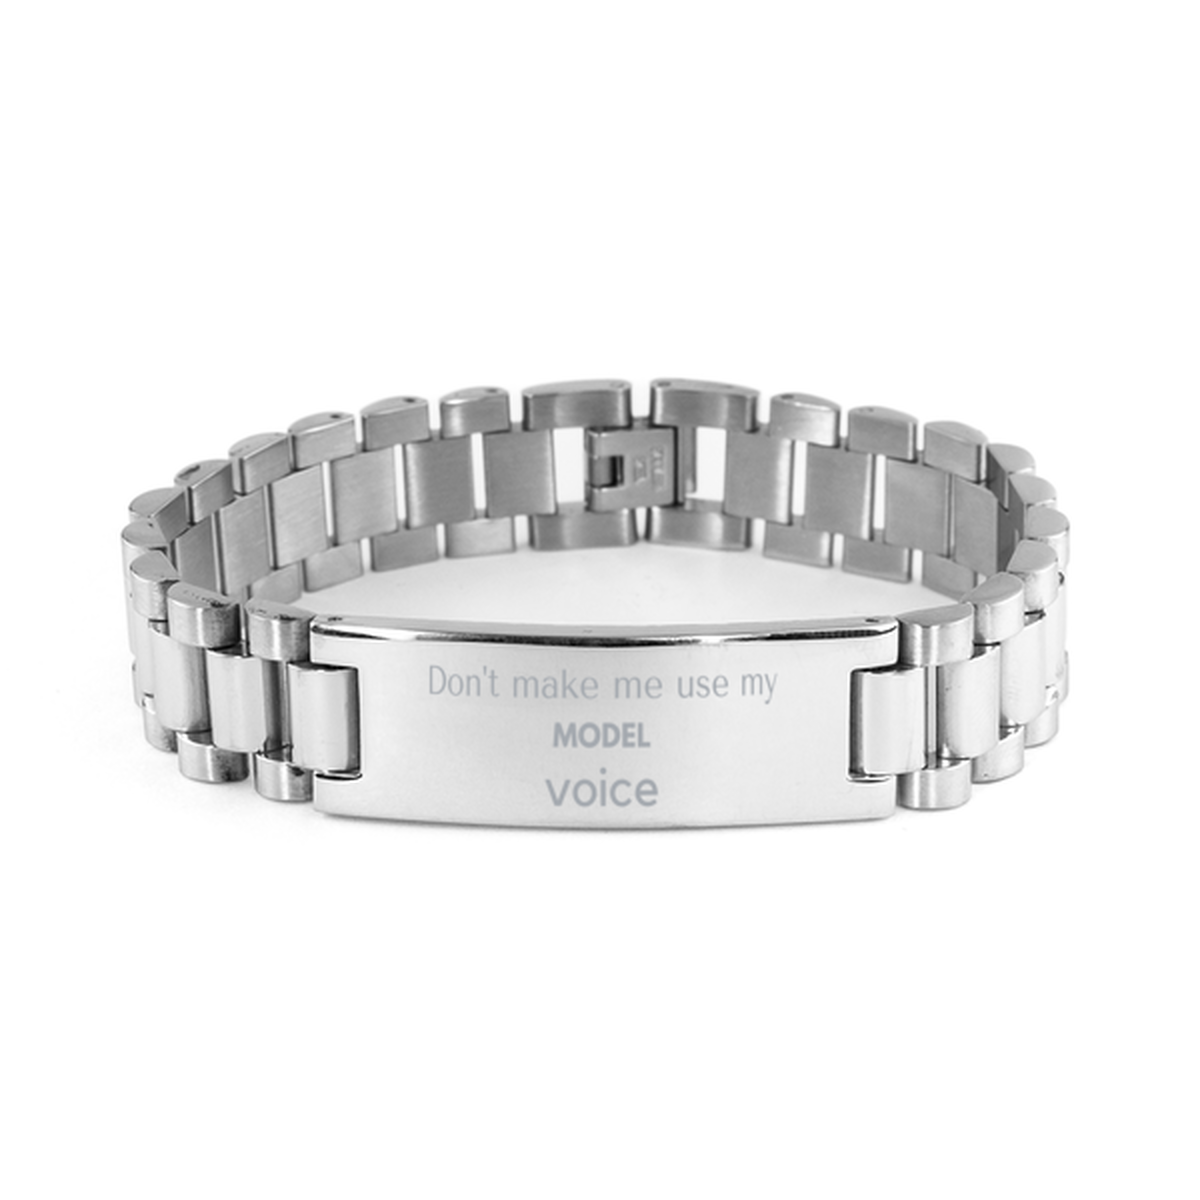 Don't make me use my Model voice, Sarcasm Model Gifts, Christmas Model Ladder Stainless Steel Bracelet Birthday Unique Gifts For Model Coworkers, Men, Women, Colleague, Friends